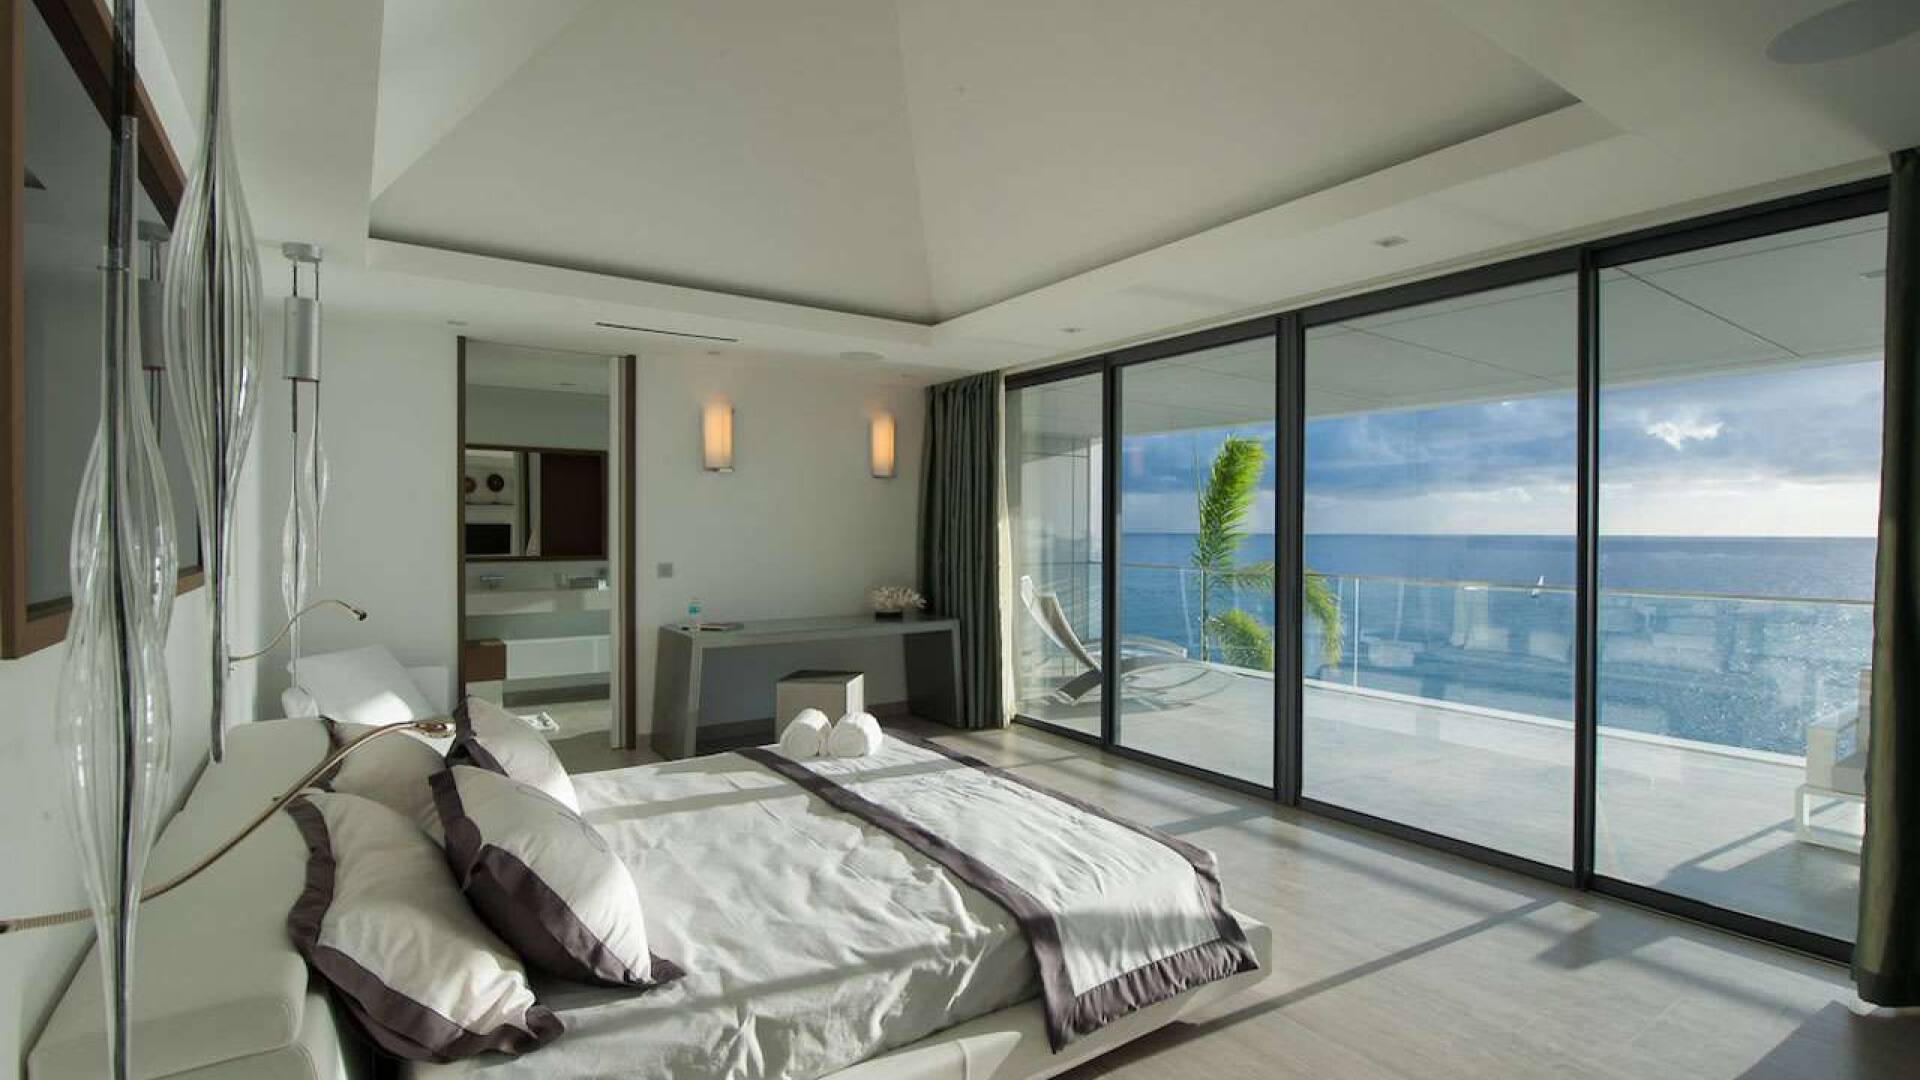 Bedroom at WV AXL, Gustavia, St. Barthelemy